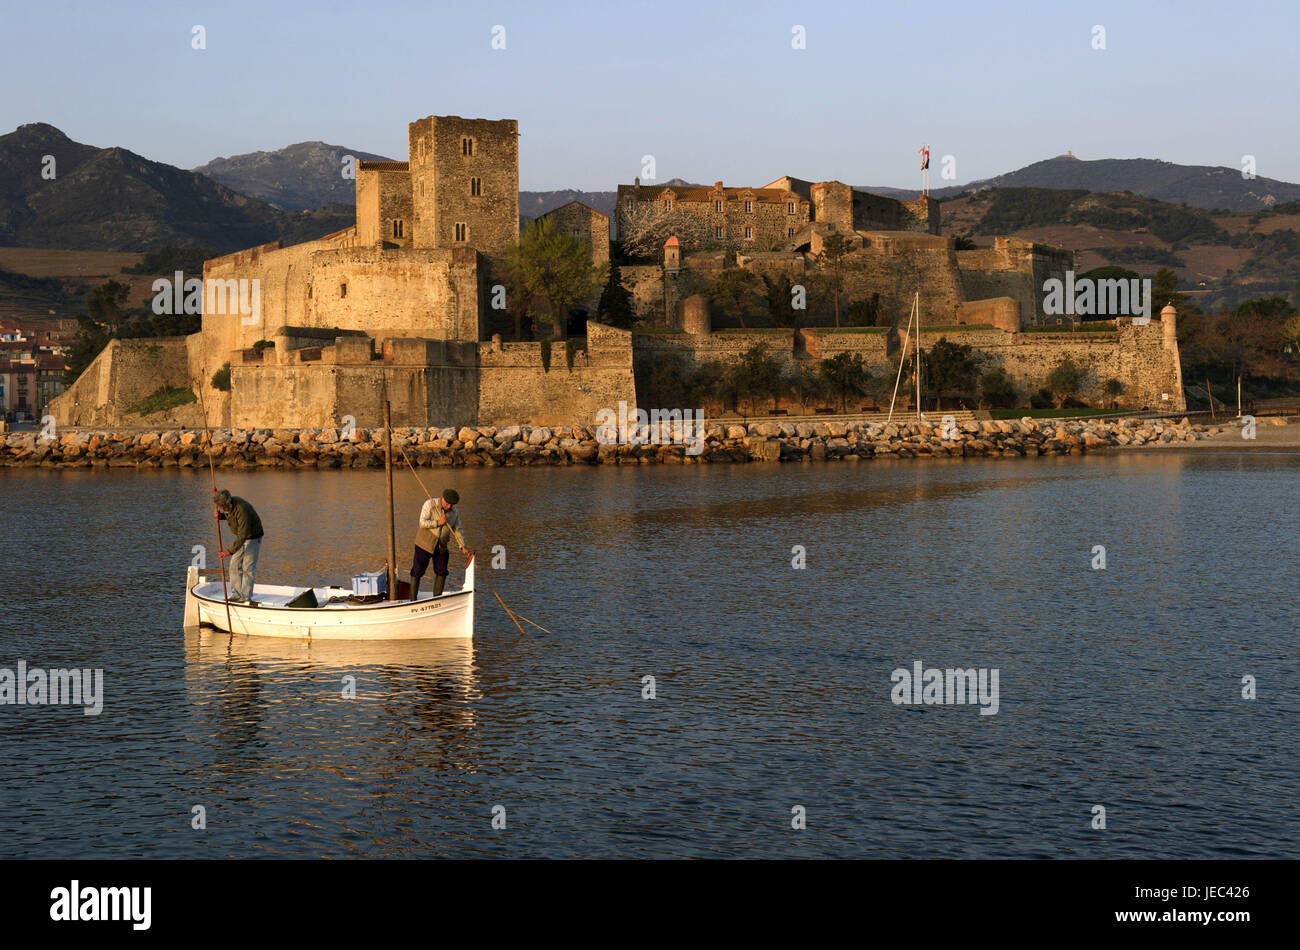 Europe, France, Collioure, Fischer on a boot, in the background on the château royal, Europe, France, Languedoc-Roussillon, Collioure, Département of Pyrénées-East ale, tag, colour picture, People, two people, man, men, adults, adult, locals, local, whole view, whole body, 40-50 years, person, person, no model release, European, stand, boat, boats, fishing boat, fishing boats, architecture, building, structure, structures, lock, locks, traditional culture, waters, water, sea, the Mediterranean Sea, scenery, sceneries, coast, coastal scenery, coastal sceneries, coasts, ocean, oceans, Stock Photo